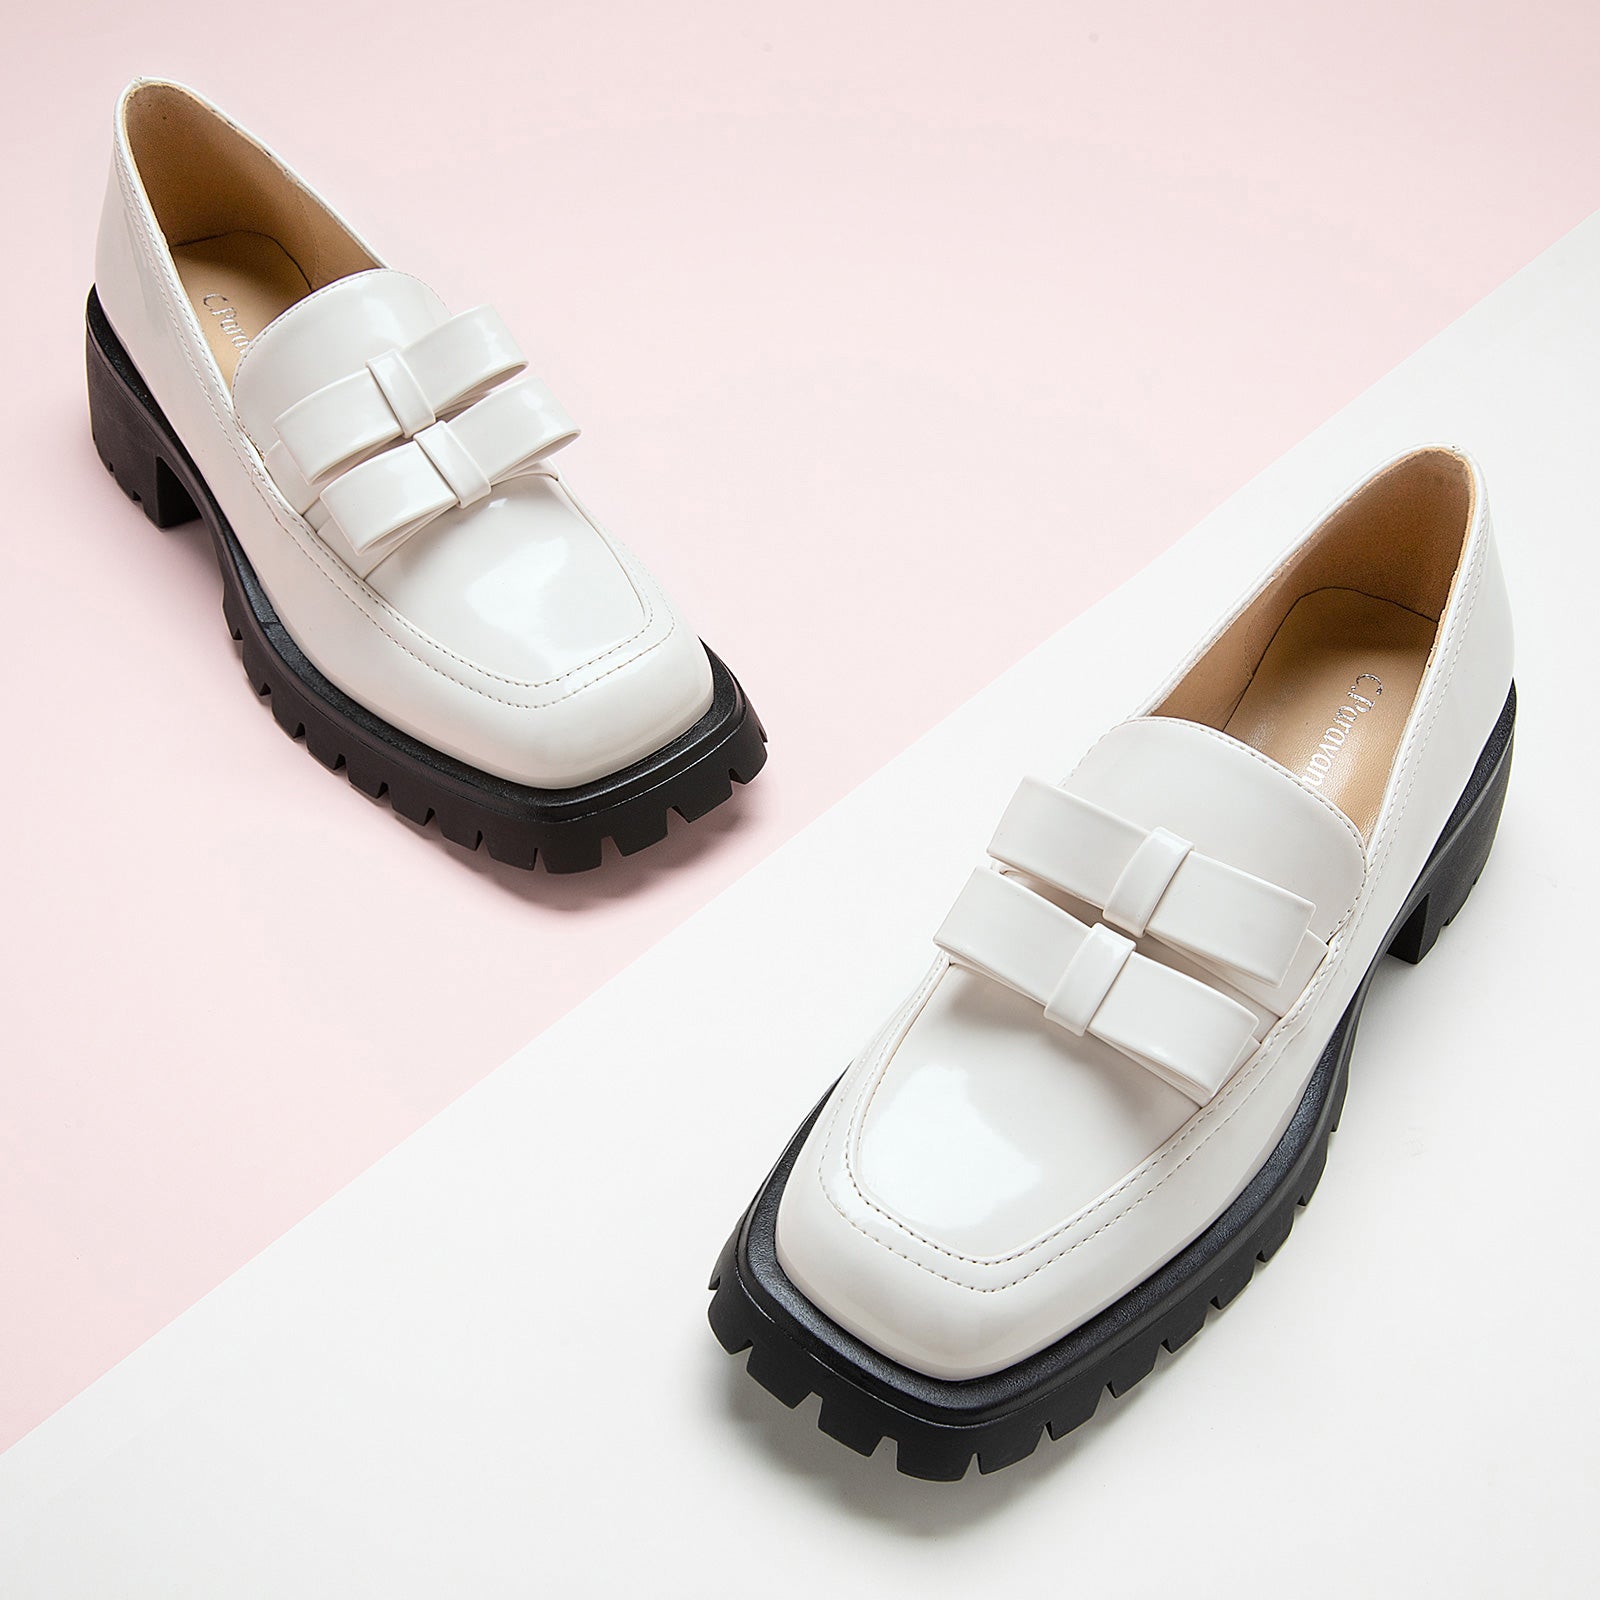 White Platform Loafers with double knots, a versatile and fashionable option for everyday wear.